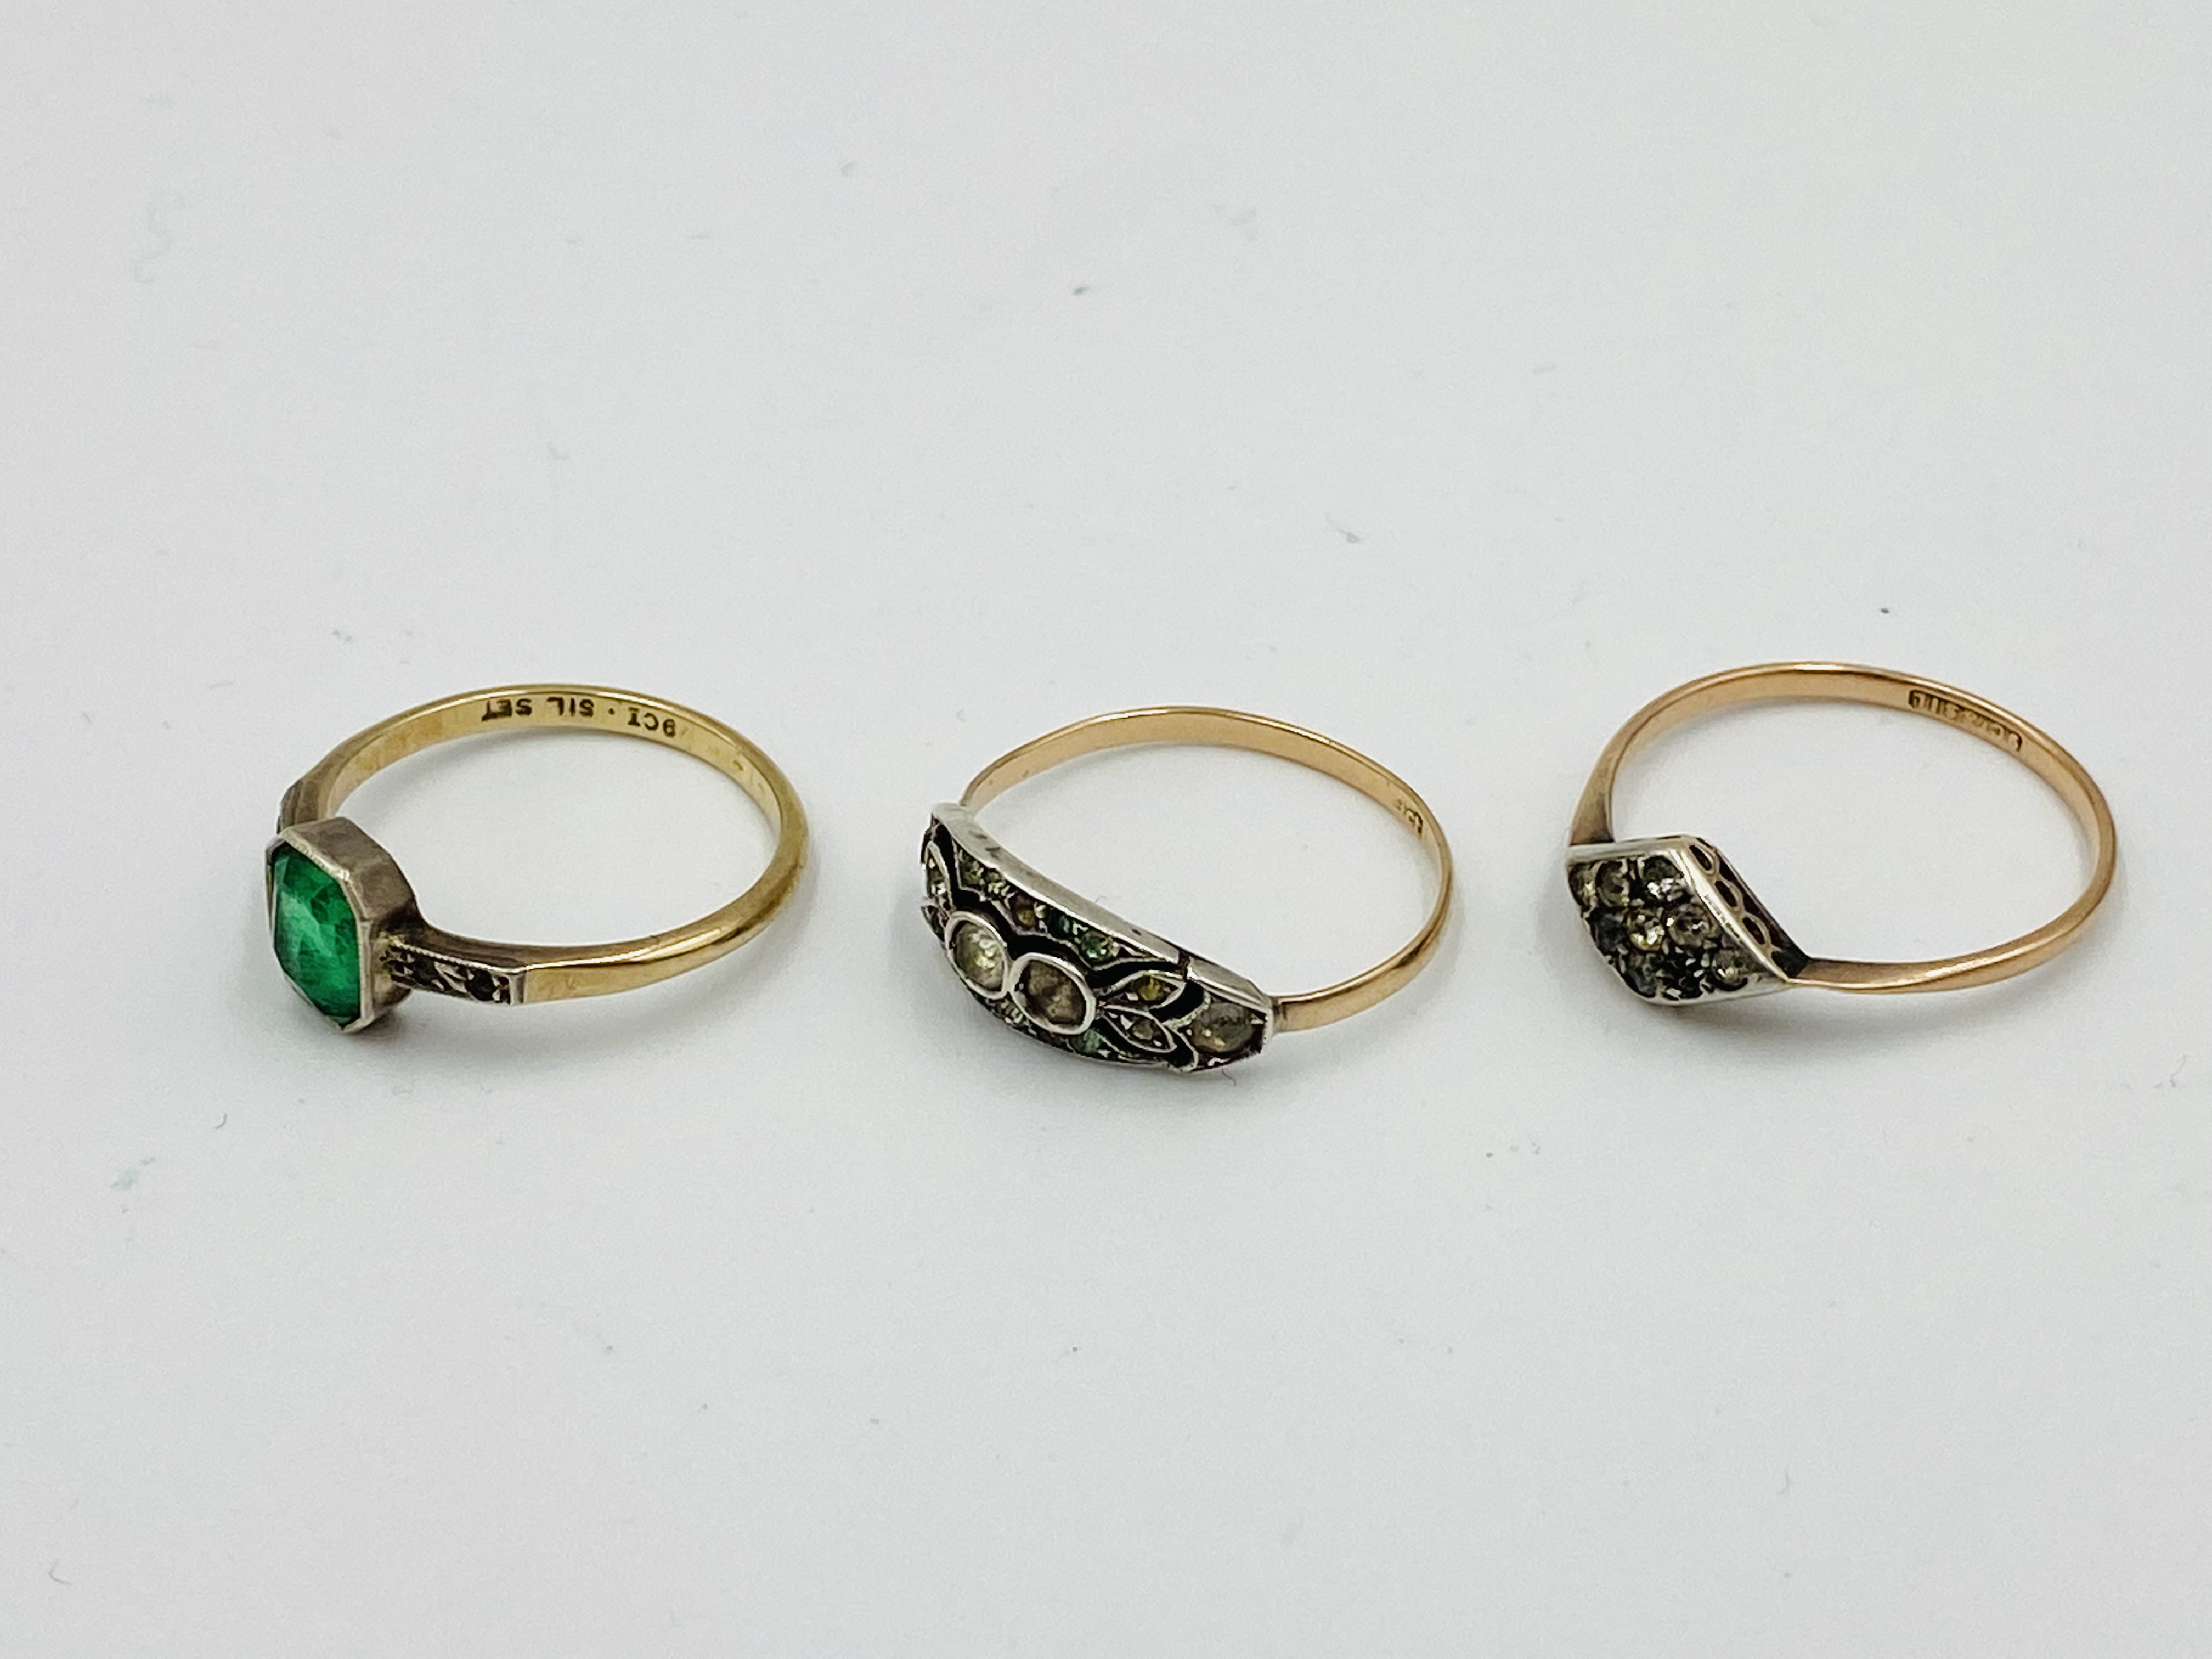 Three 9ct gold rings together with a pair of earrings - Image 4 of 5